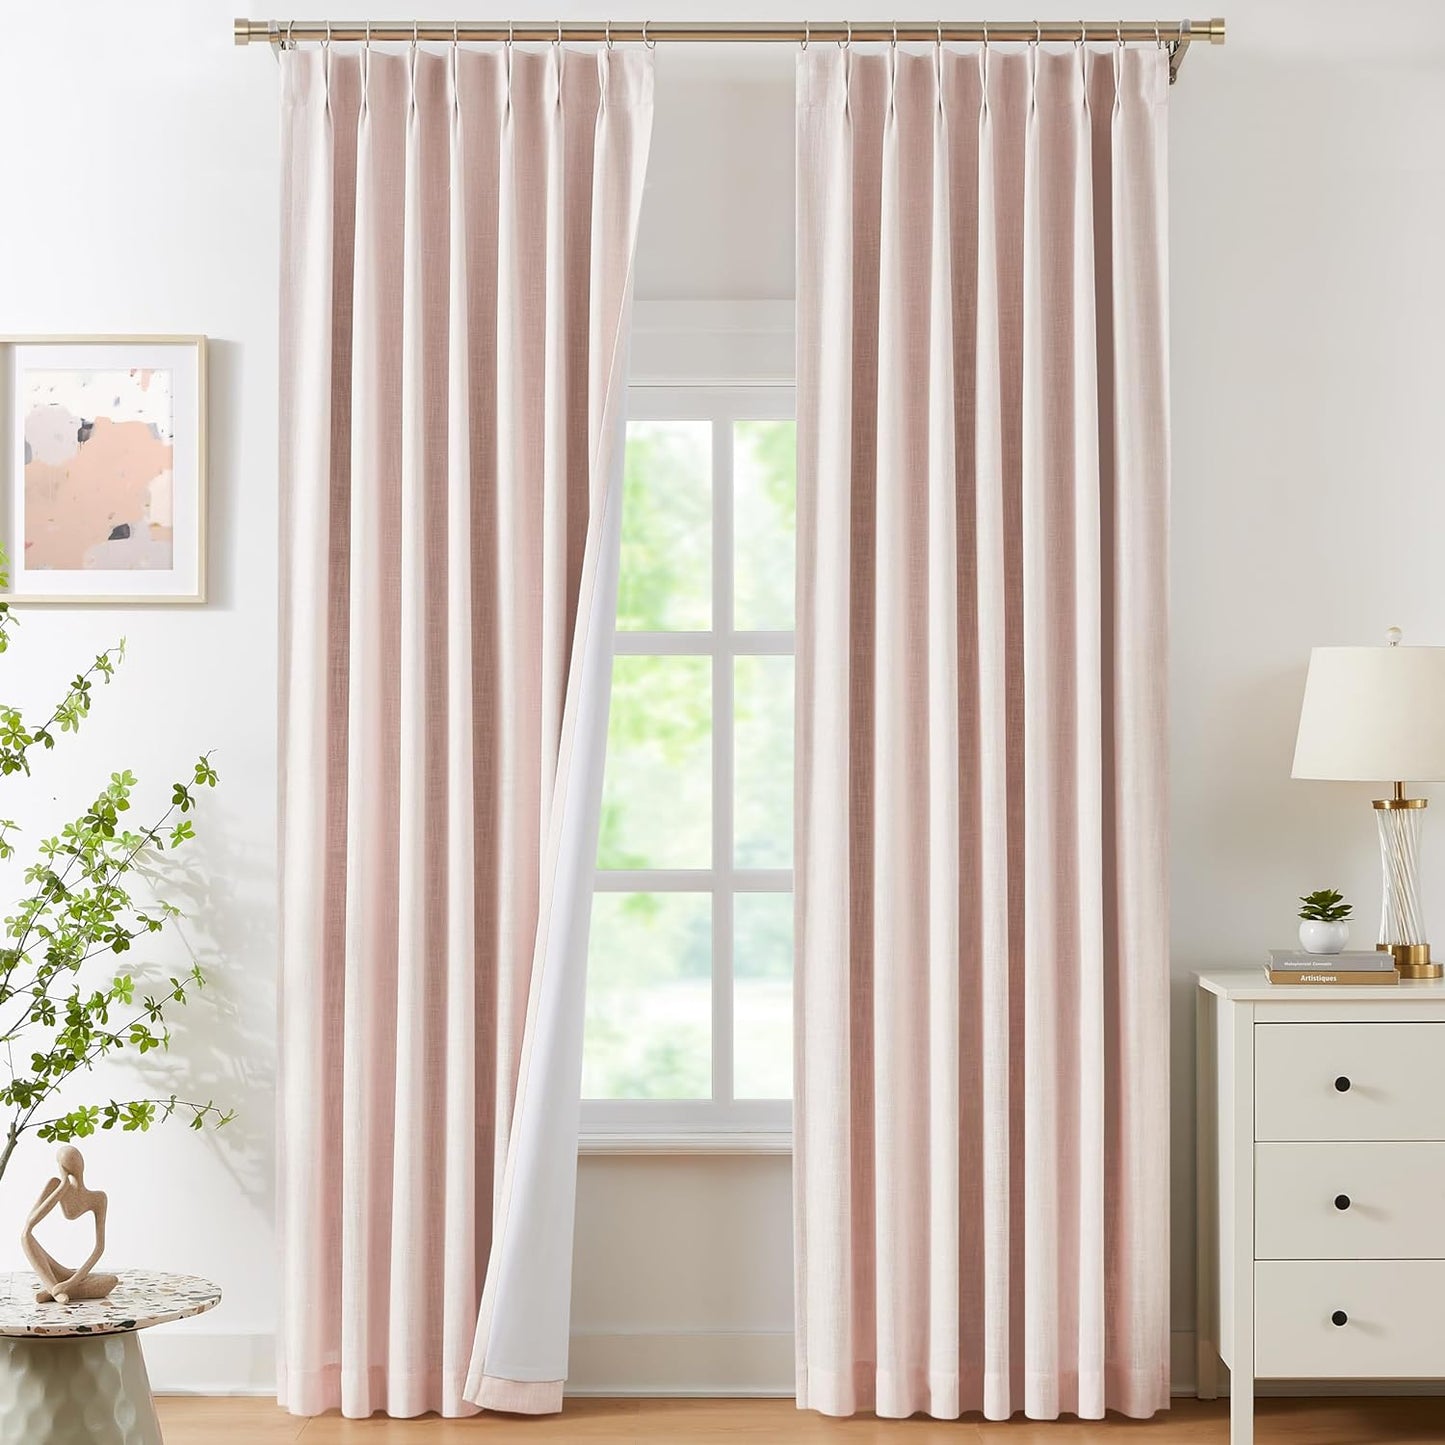 WEST LAKE Extra Long 9 Ft Bailey Linen Pinch Pleat Full Blackout Curtains 108 Inches Length,Natural Pinch Pleated Panels with Back Tabs,Rustic Window Treatment Bedroom Living Room,40"Wx108"Lx2,Natural  WEST LAKE Pink 40"X102"X2 